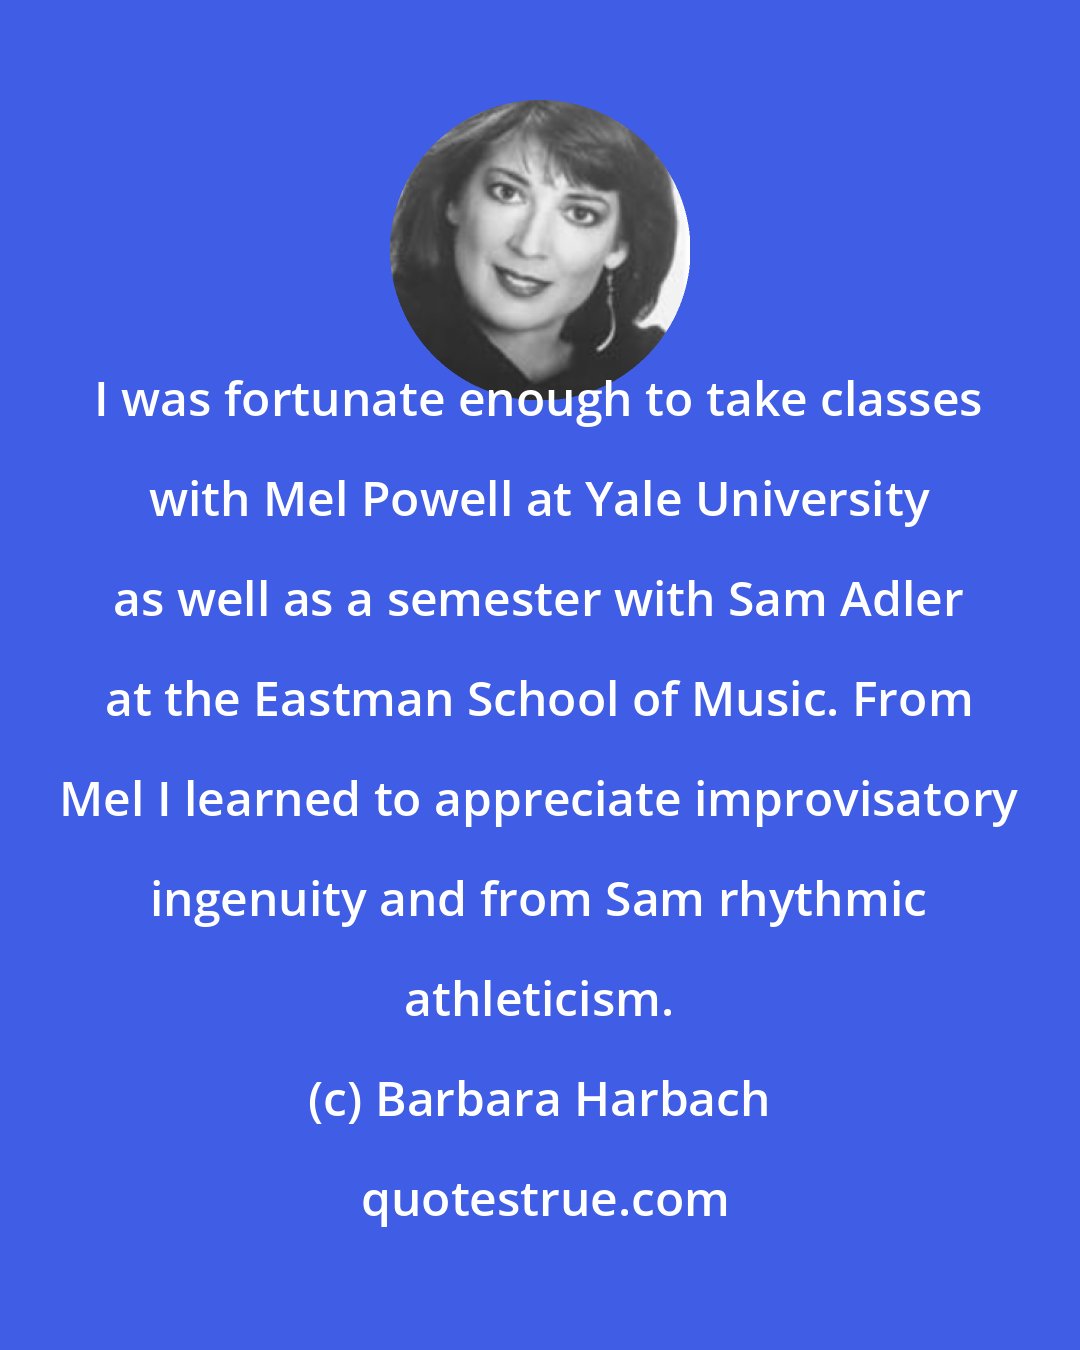 Barbara Harbach: I was fortunate enough to take classes with Mel Powell at Yale University as well as a semester with Sam Adler at the Eastman School of Music. From Mel I learned to appreciate improvisatory ingenuity and from Sam rhythmic athleticism.